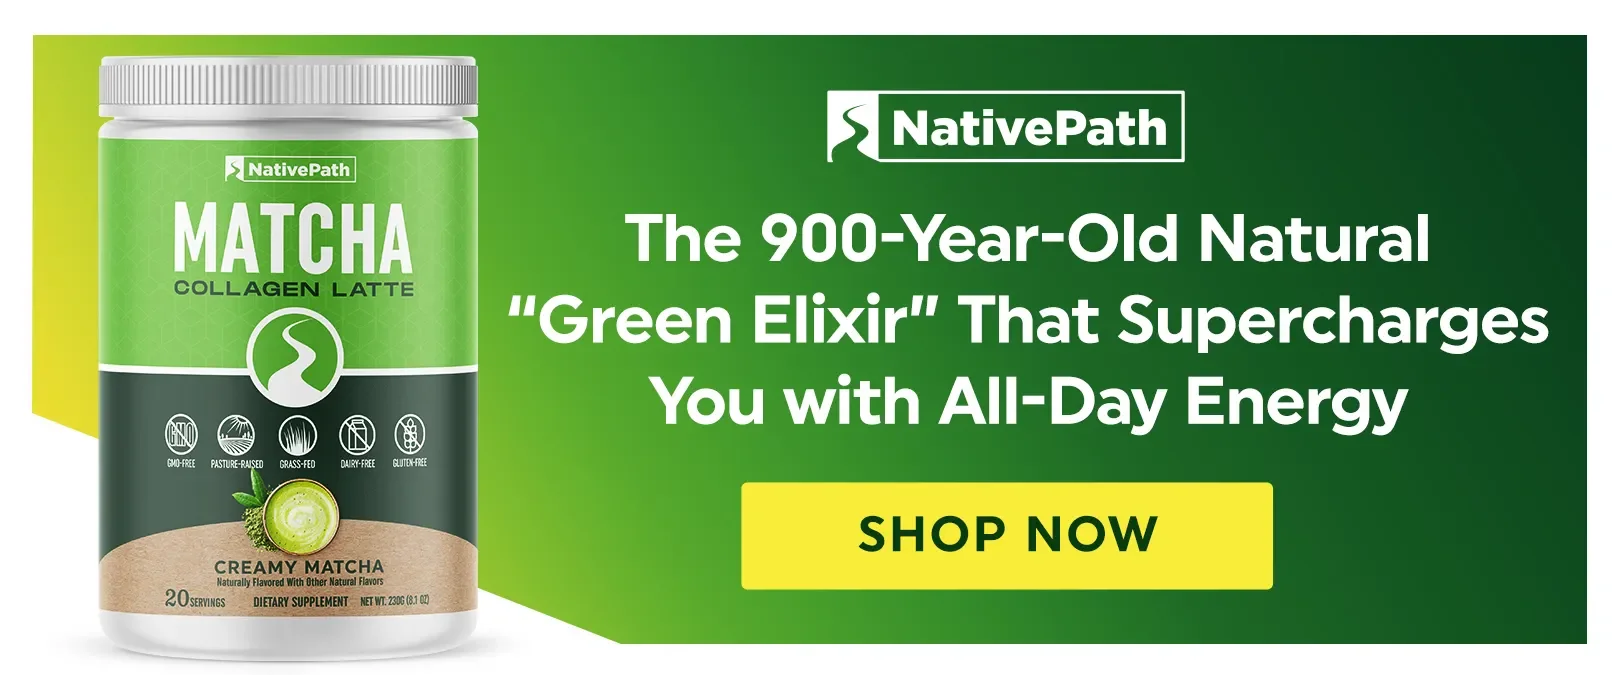 NativePath Matcha Collagen Powder: The 900-Year-Old Natural Green Elixir That Supercharges You with All-Day Energy